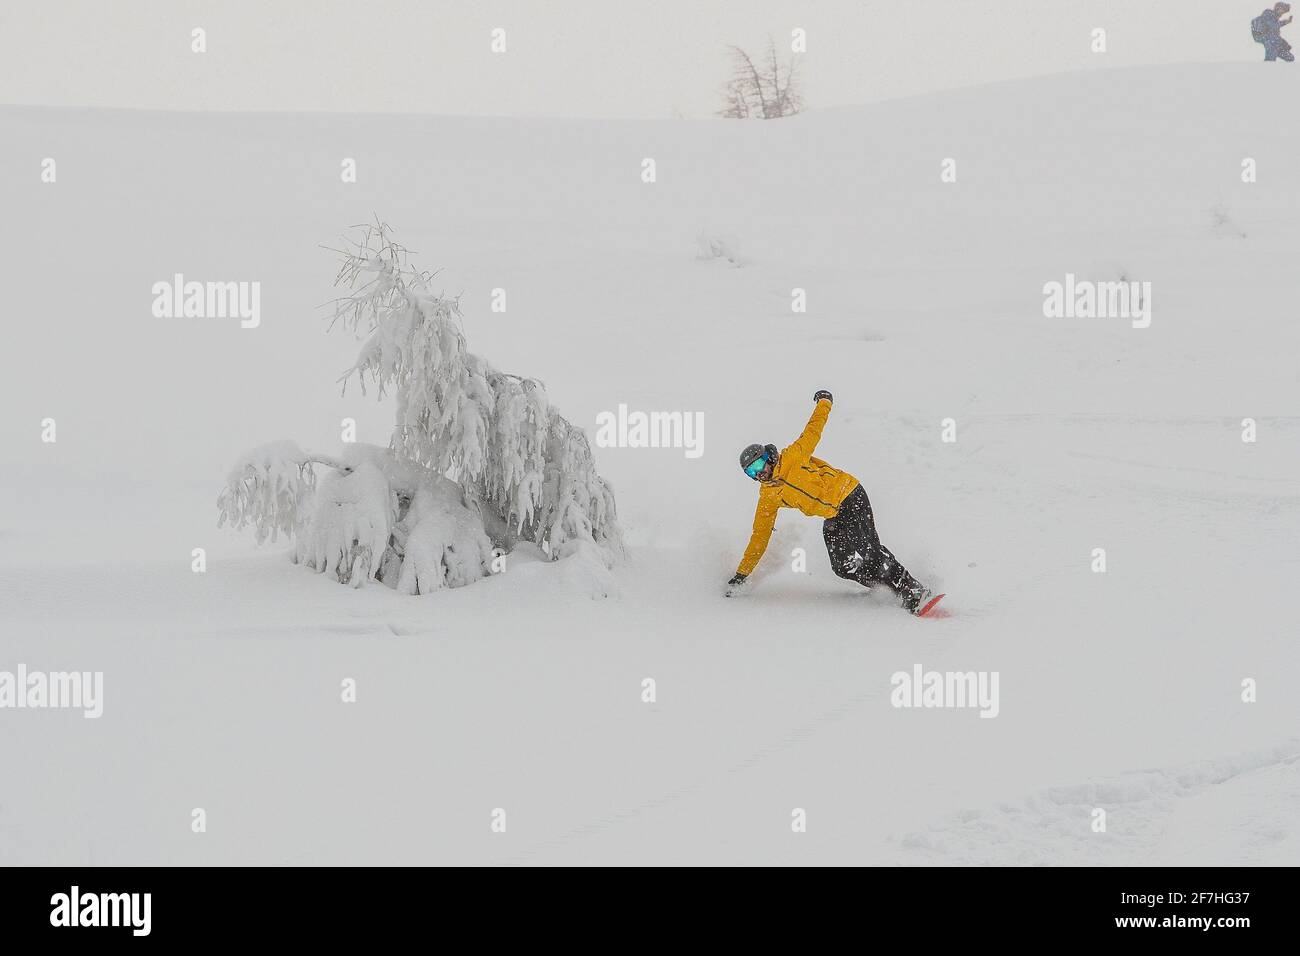 A snowboarder in powder snow going downhill in a curve. Boarder with yellow clothing with black trousers and orange board riding in deep powder on a c Stock Photo